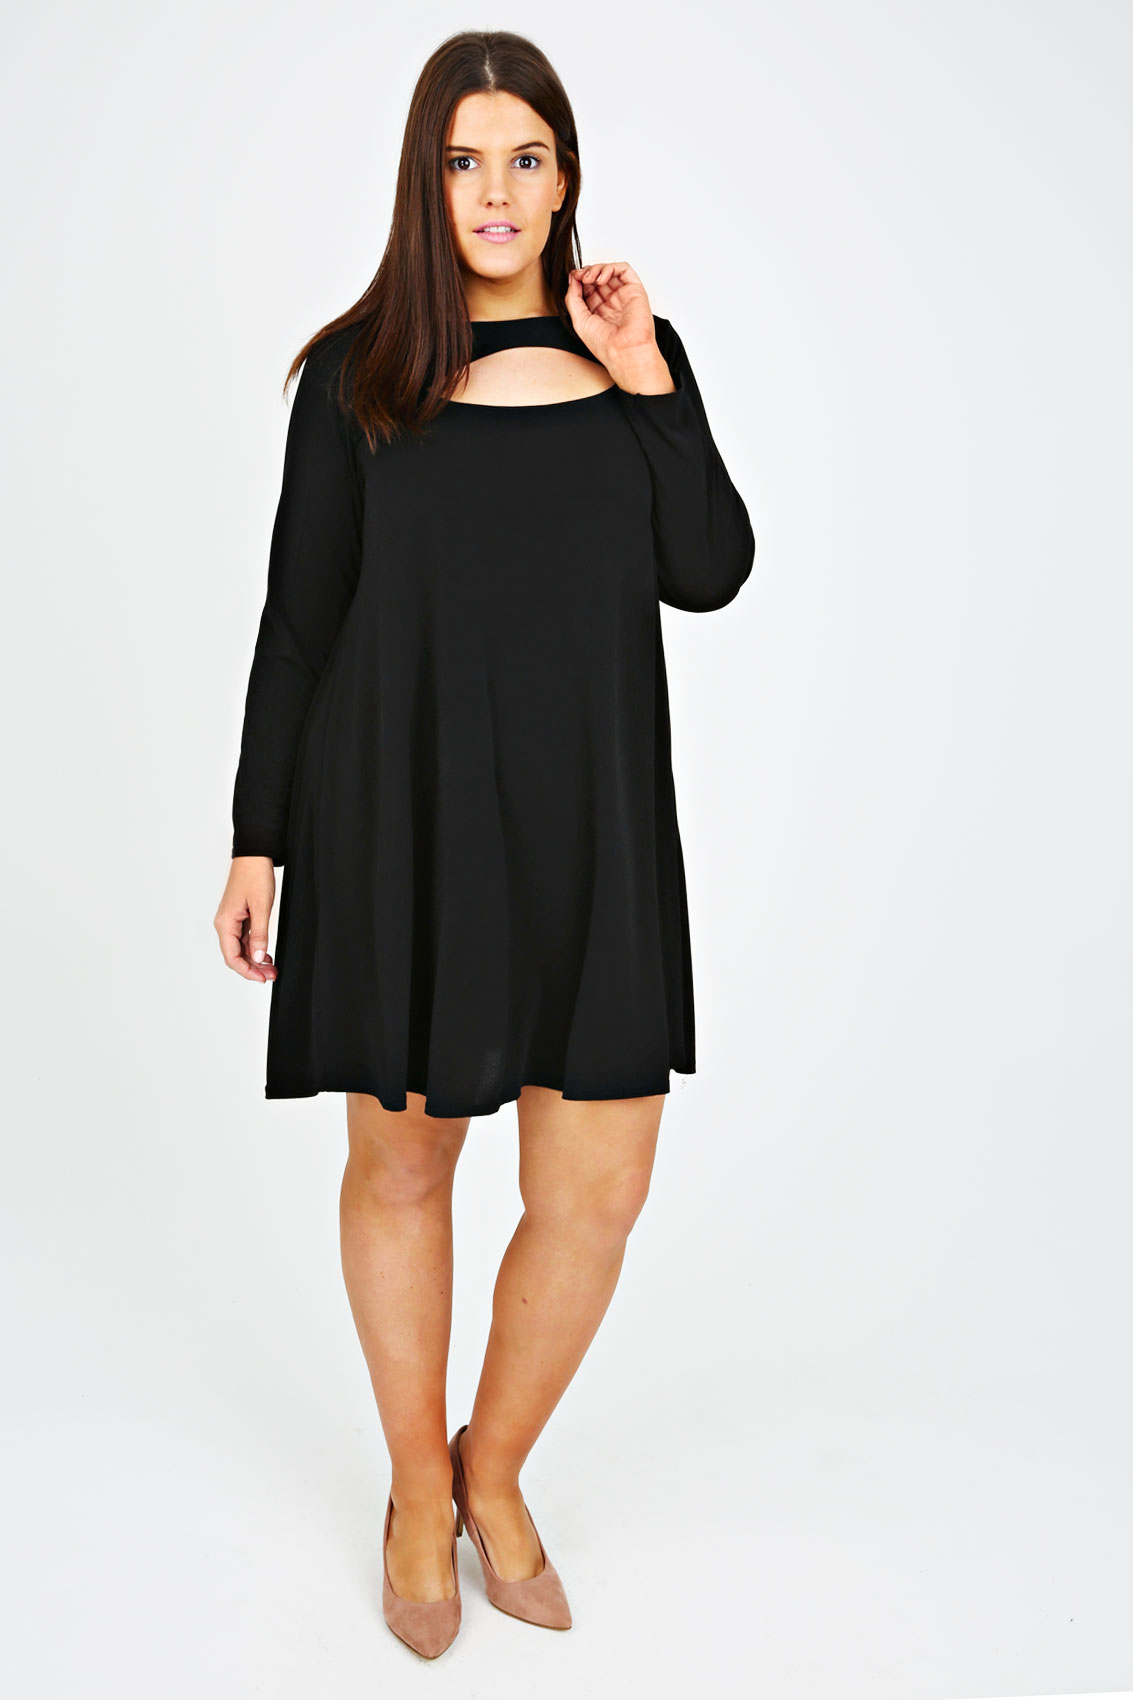 Black Swing Tunic Dress With Cut Out Detail plus Size 14 to 28